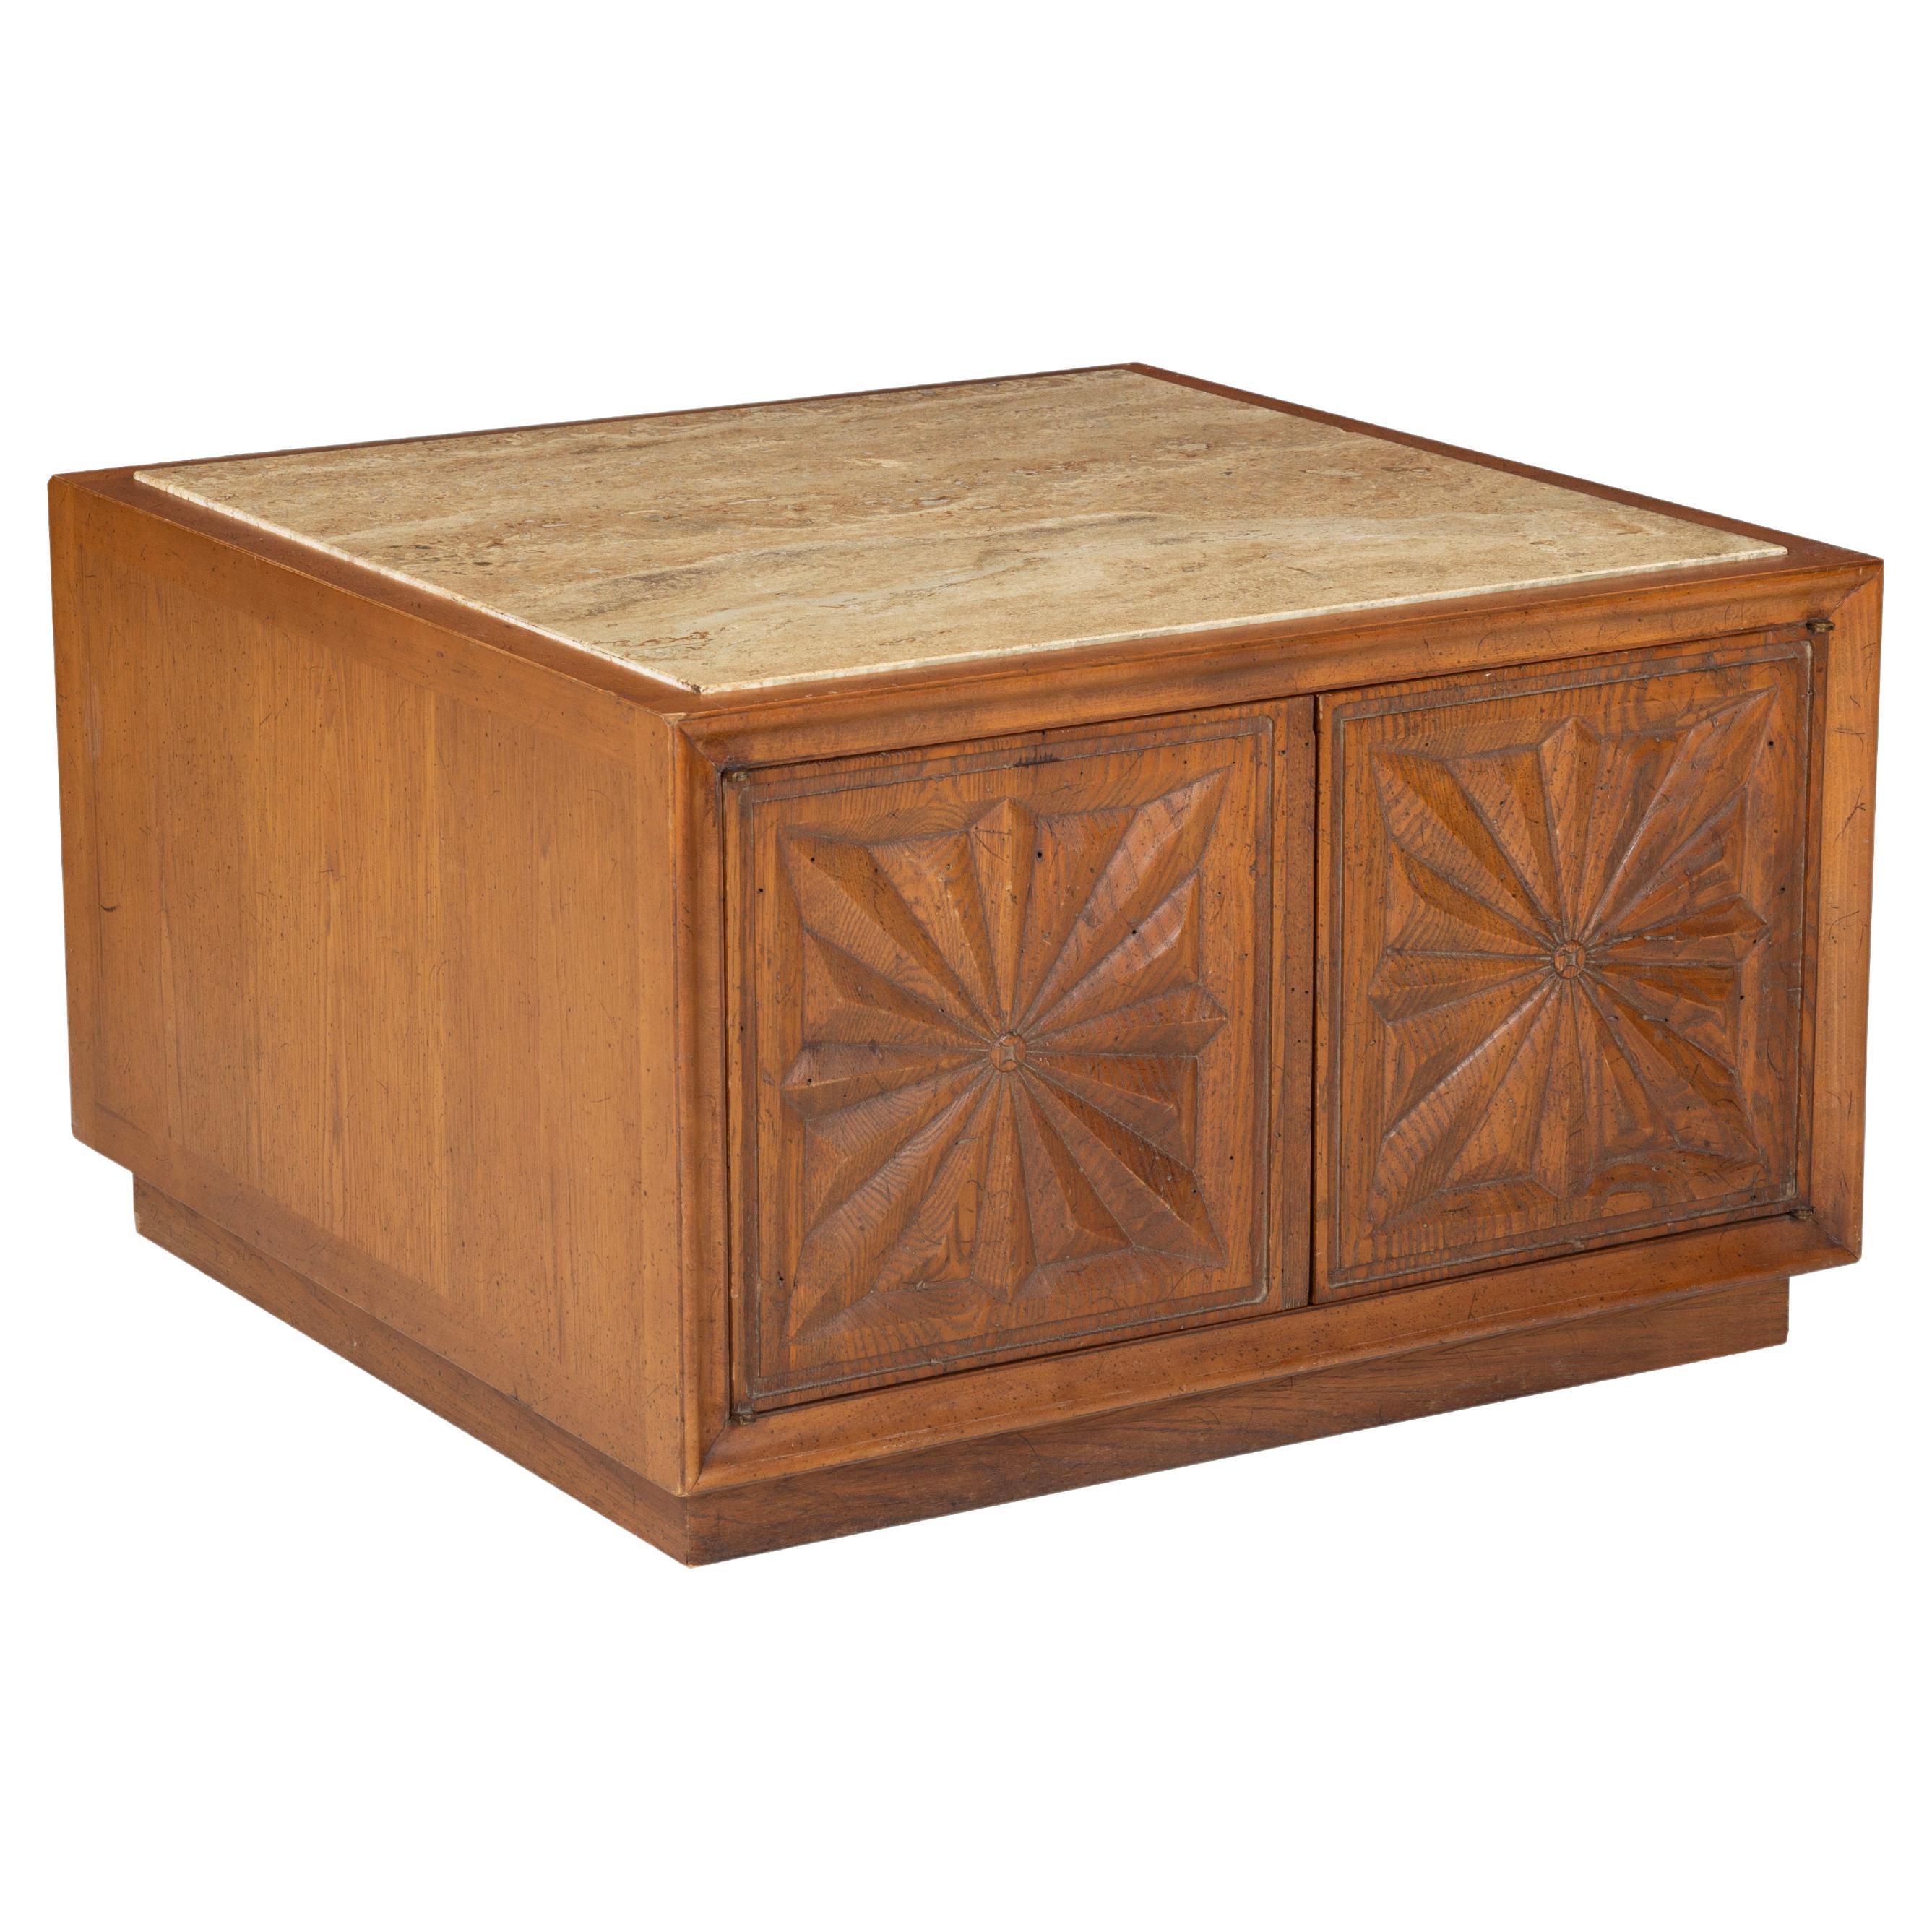 Henredon "Town and Country" Oak and Travertine Coffee Table